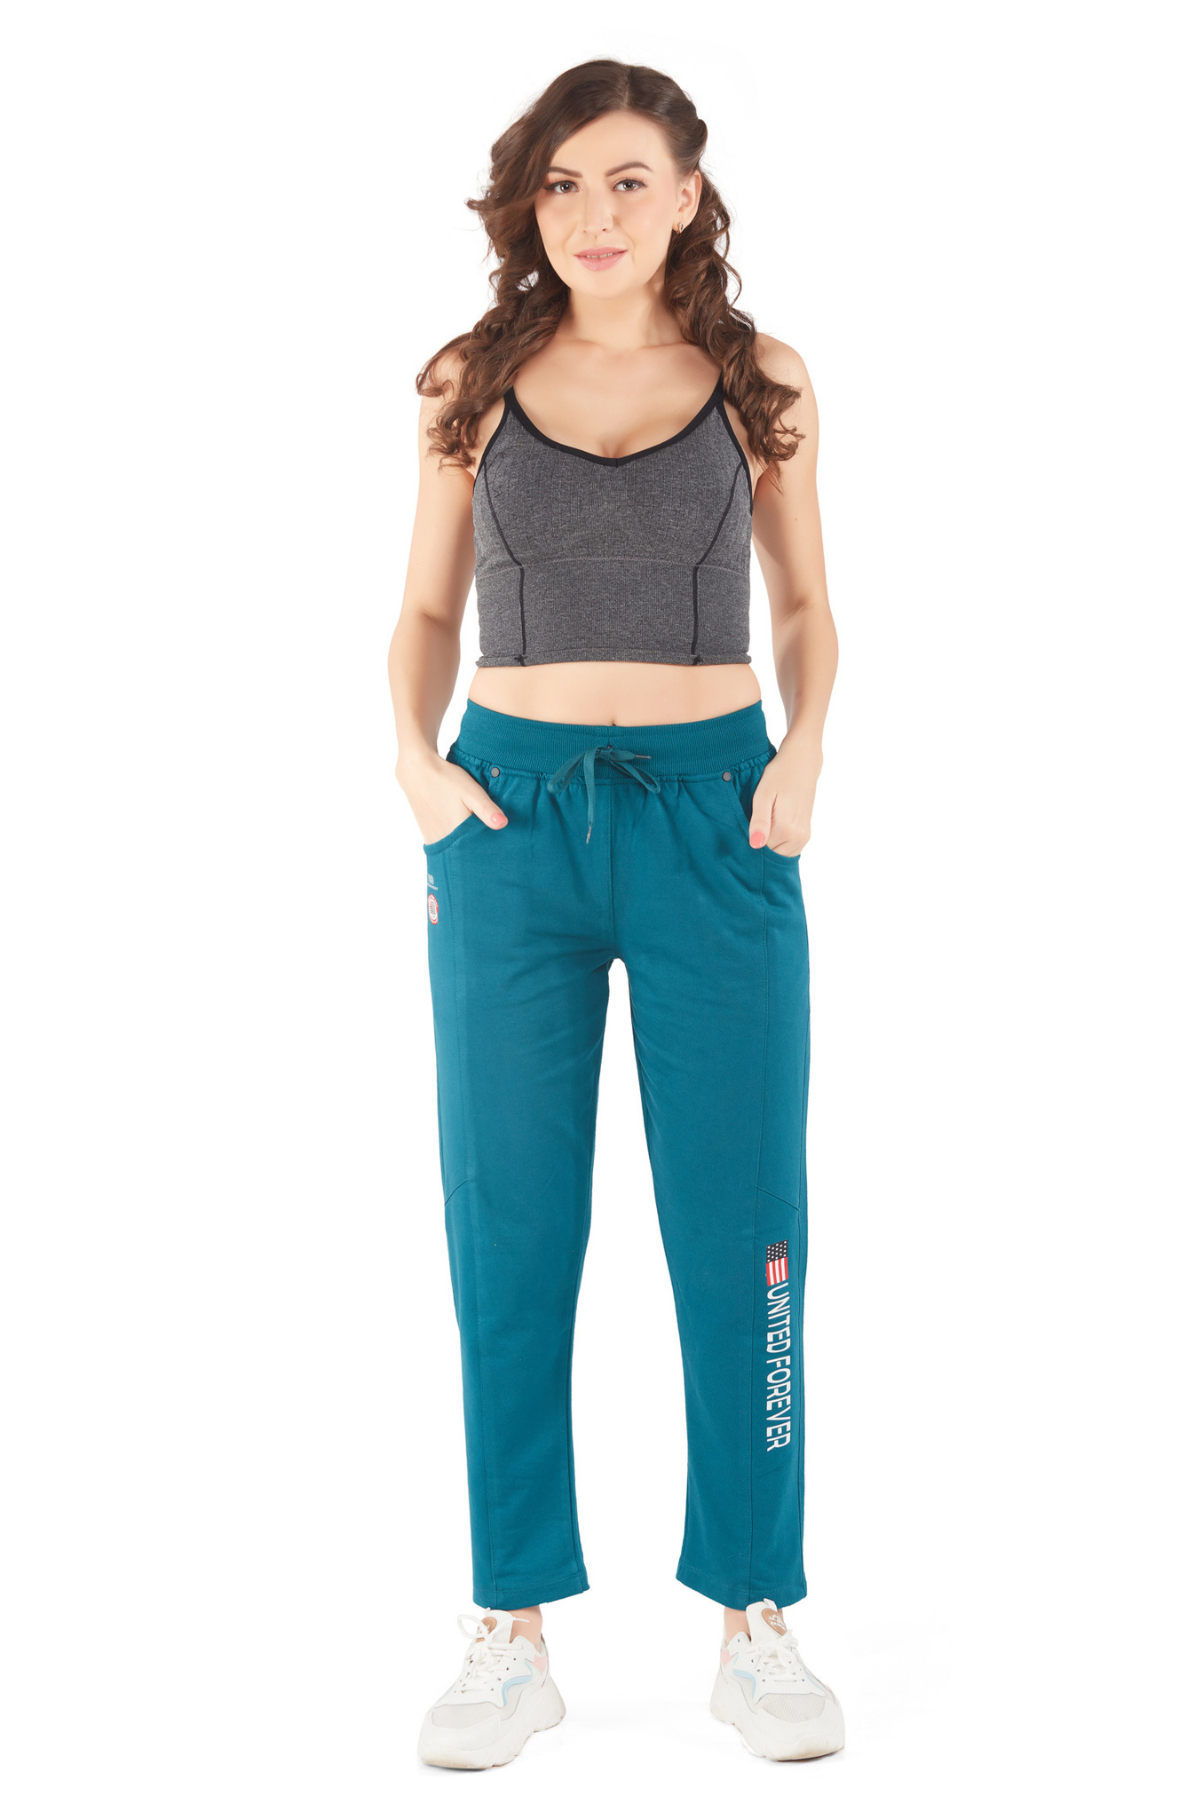 Buy Regular Fit Cotton Lounge Pants for Women Online In India